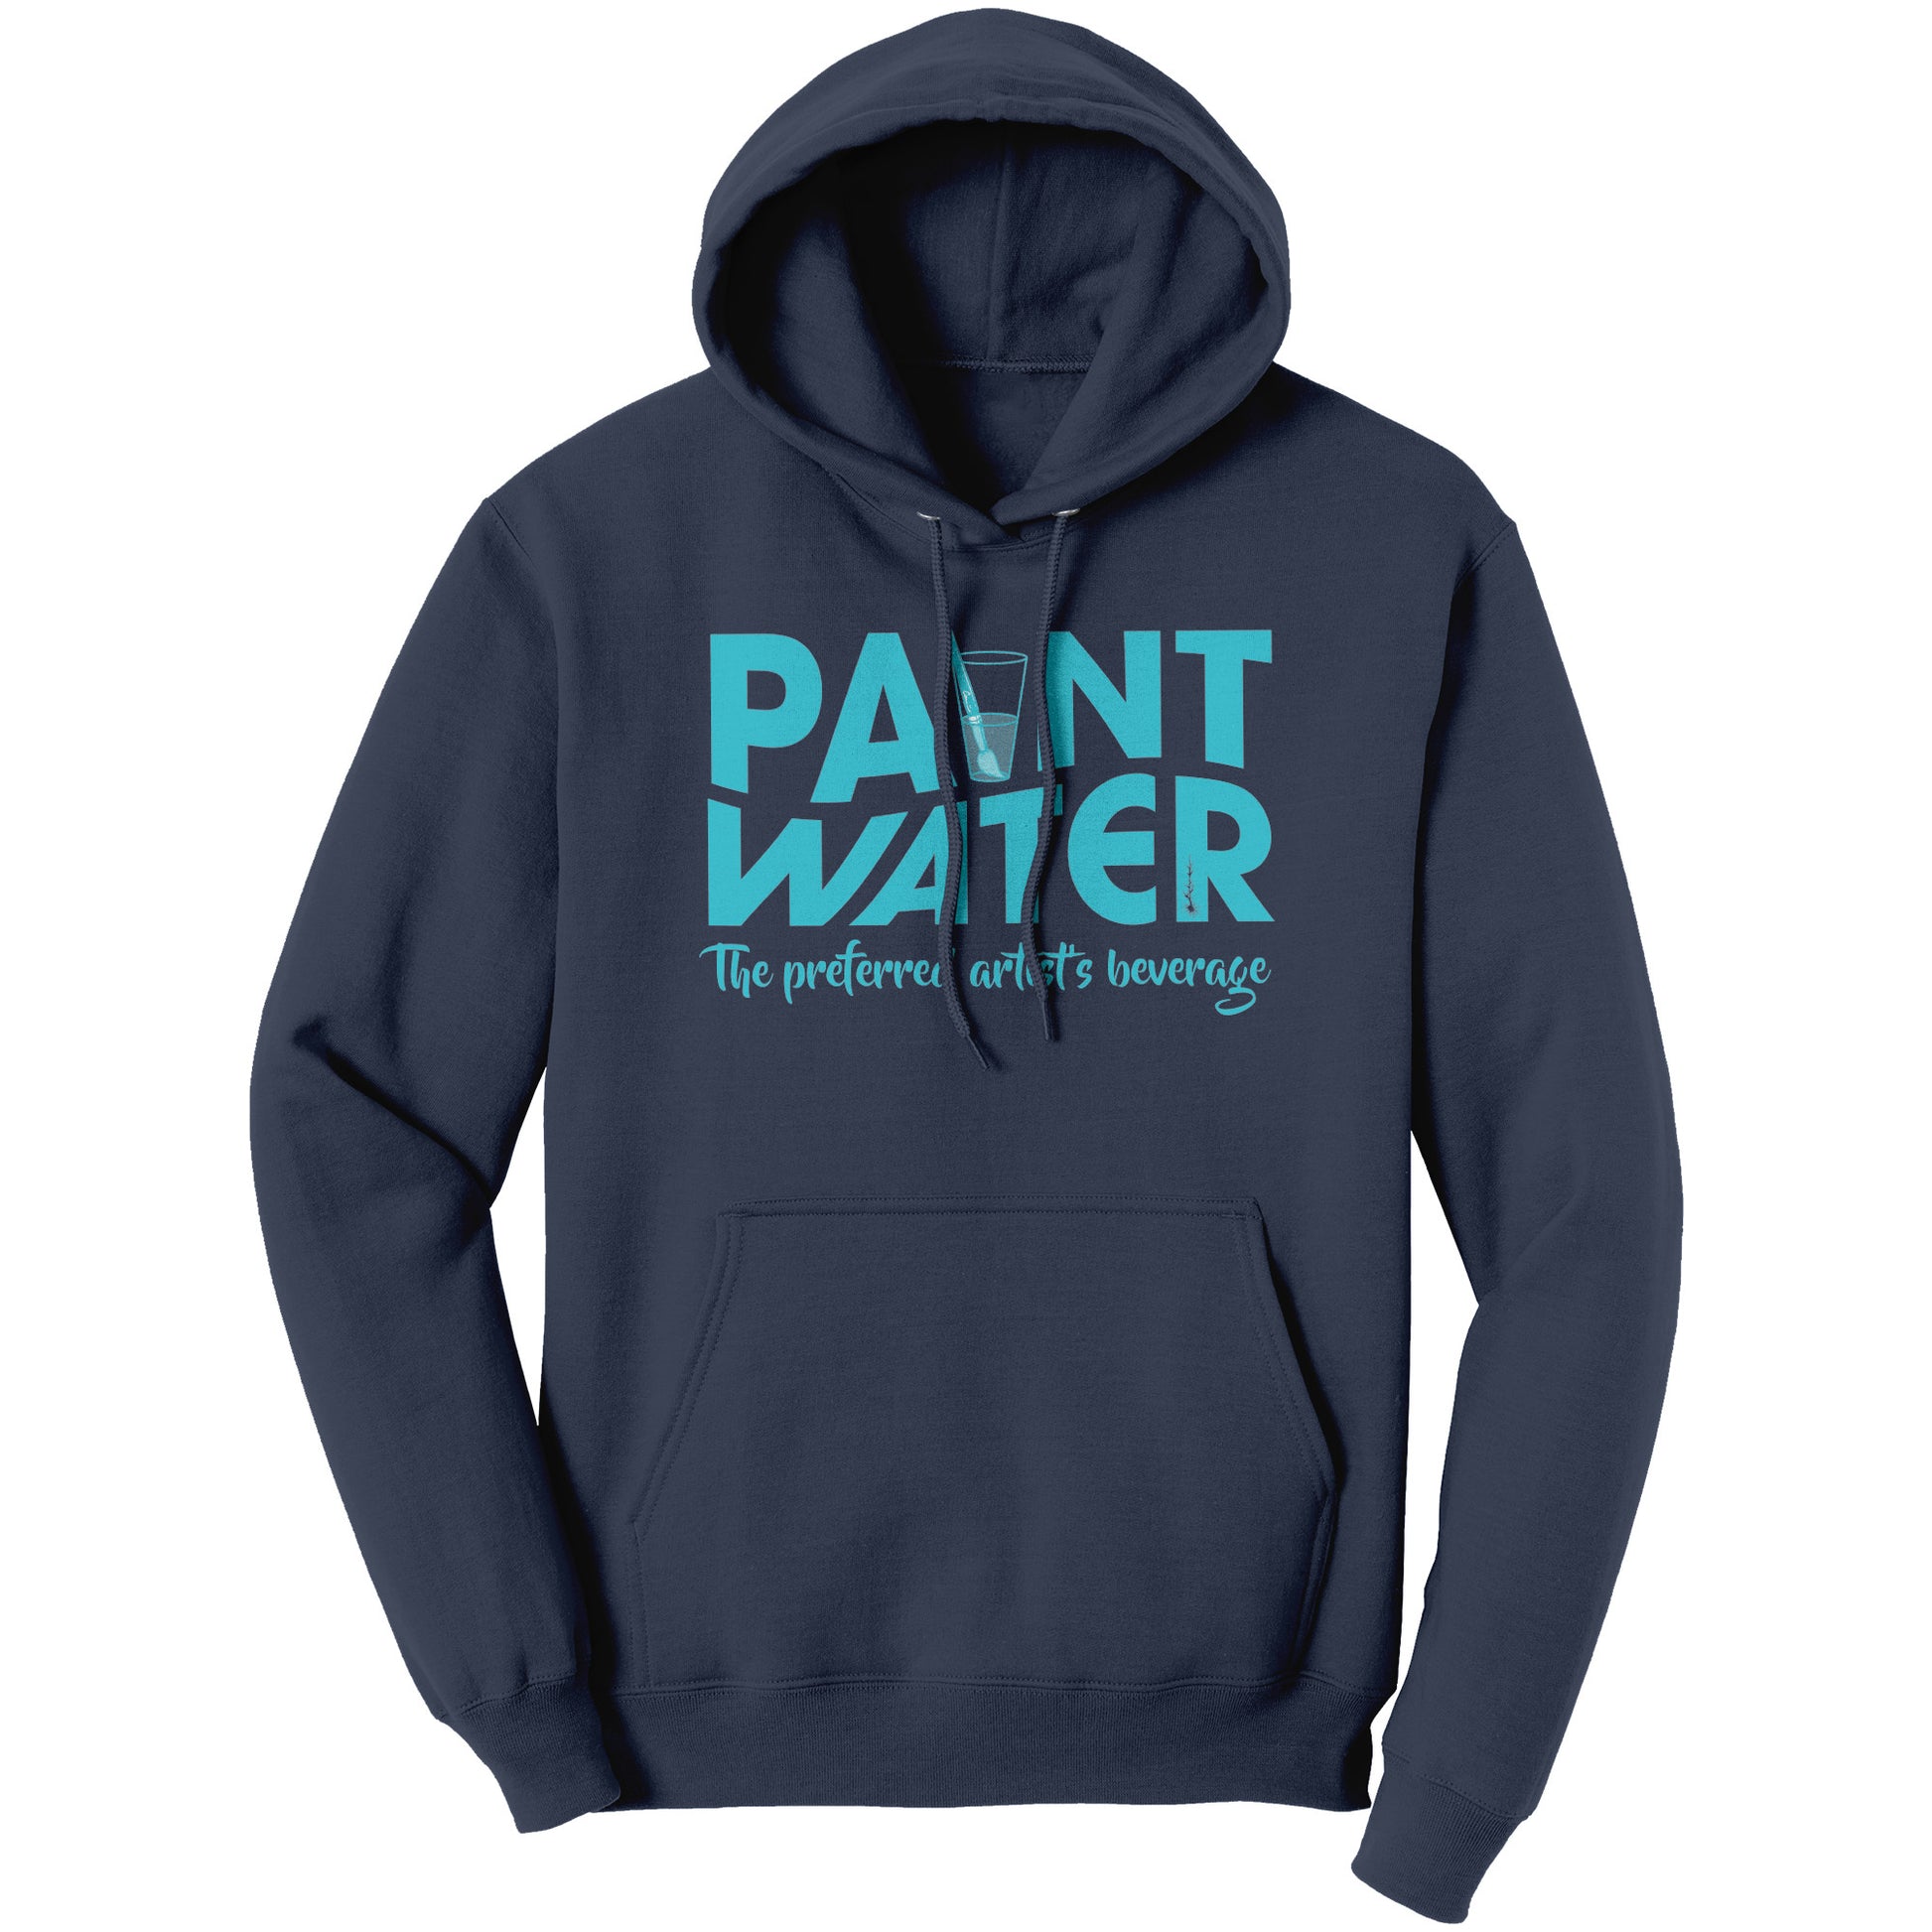 Navy blue hoodie with light blue front print saying Paint Water, The preferred artist's beverage.